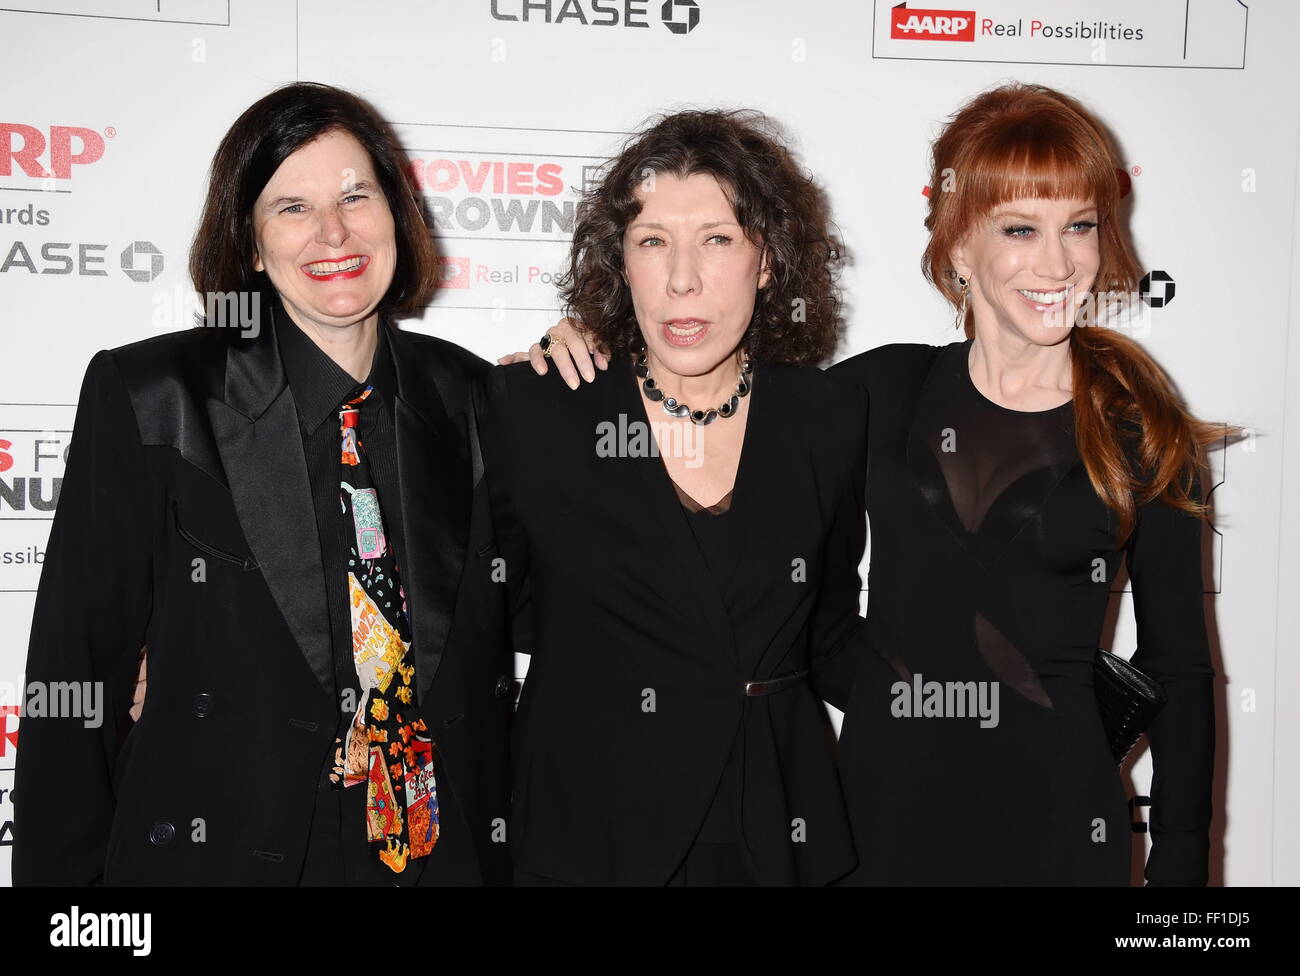 BEVERLY HILLS, CA - FEBRUARY 08: (L-R) Actresses/comediennes Paula Poundstone, Lily Tomlin and host Kathy Griffin attend AARP's Movie For GrownUps Awards at the Regent Beverly Wilshire Four Seasons Hotel on February 8, 2016 in Beverly Hills, California. Stock Photo